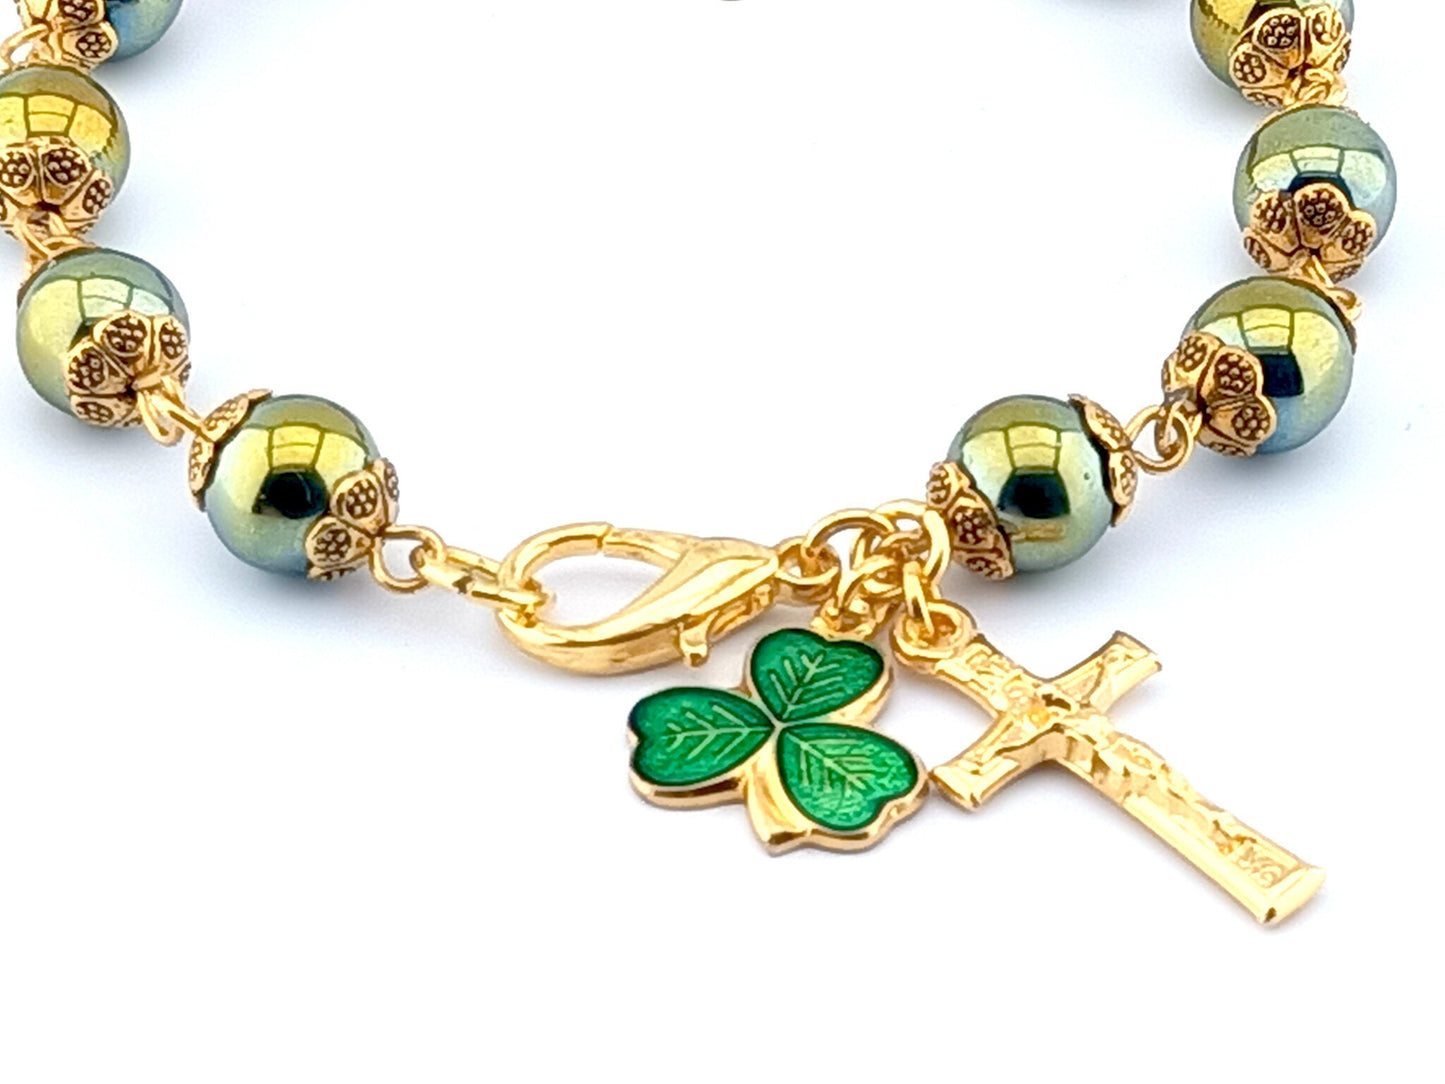 Our Lady of Sorrows unique rosary beads single decade bracelet with green hemitite beads, golden bead caps, crucifix, lobster clasp and picture medal.